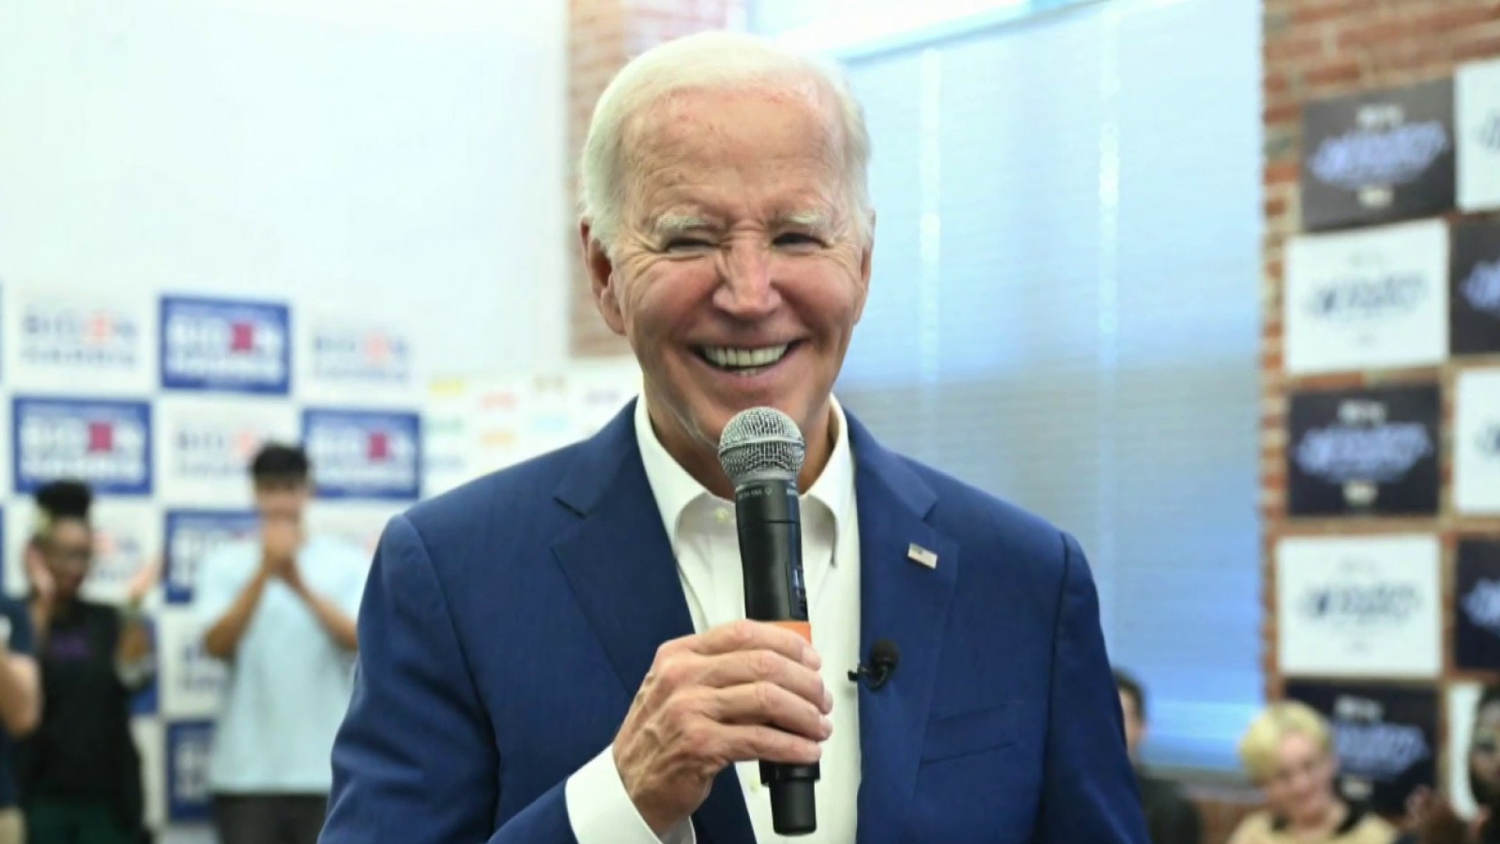 Biden says voters 'still want me to be the nominee'